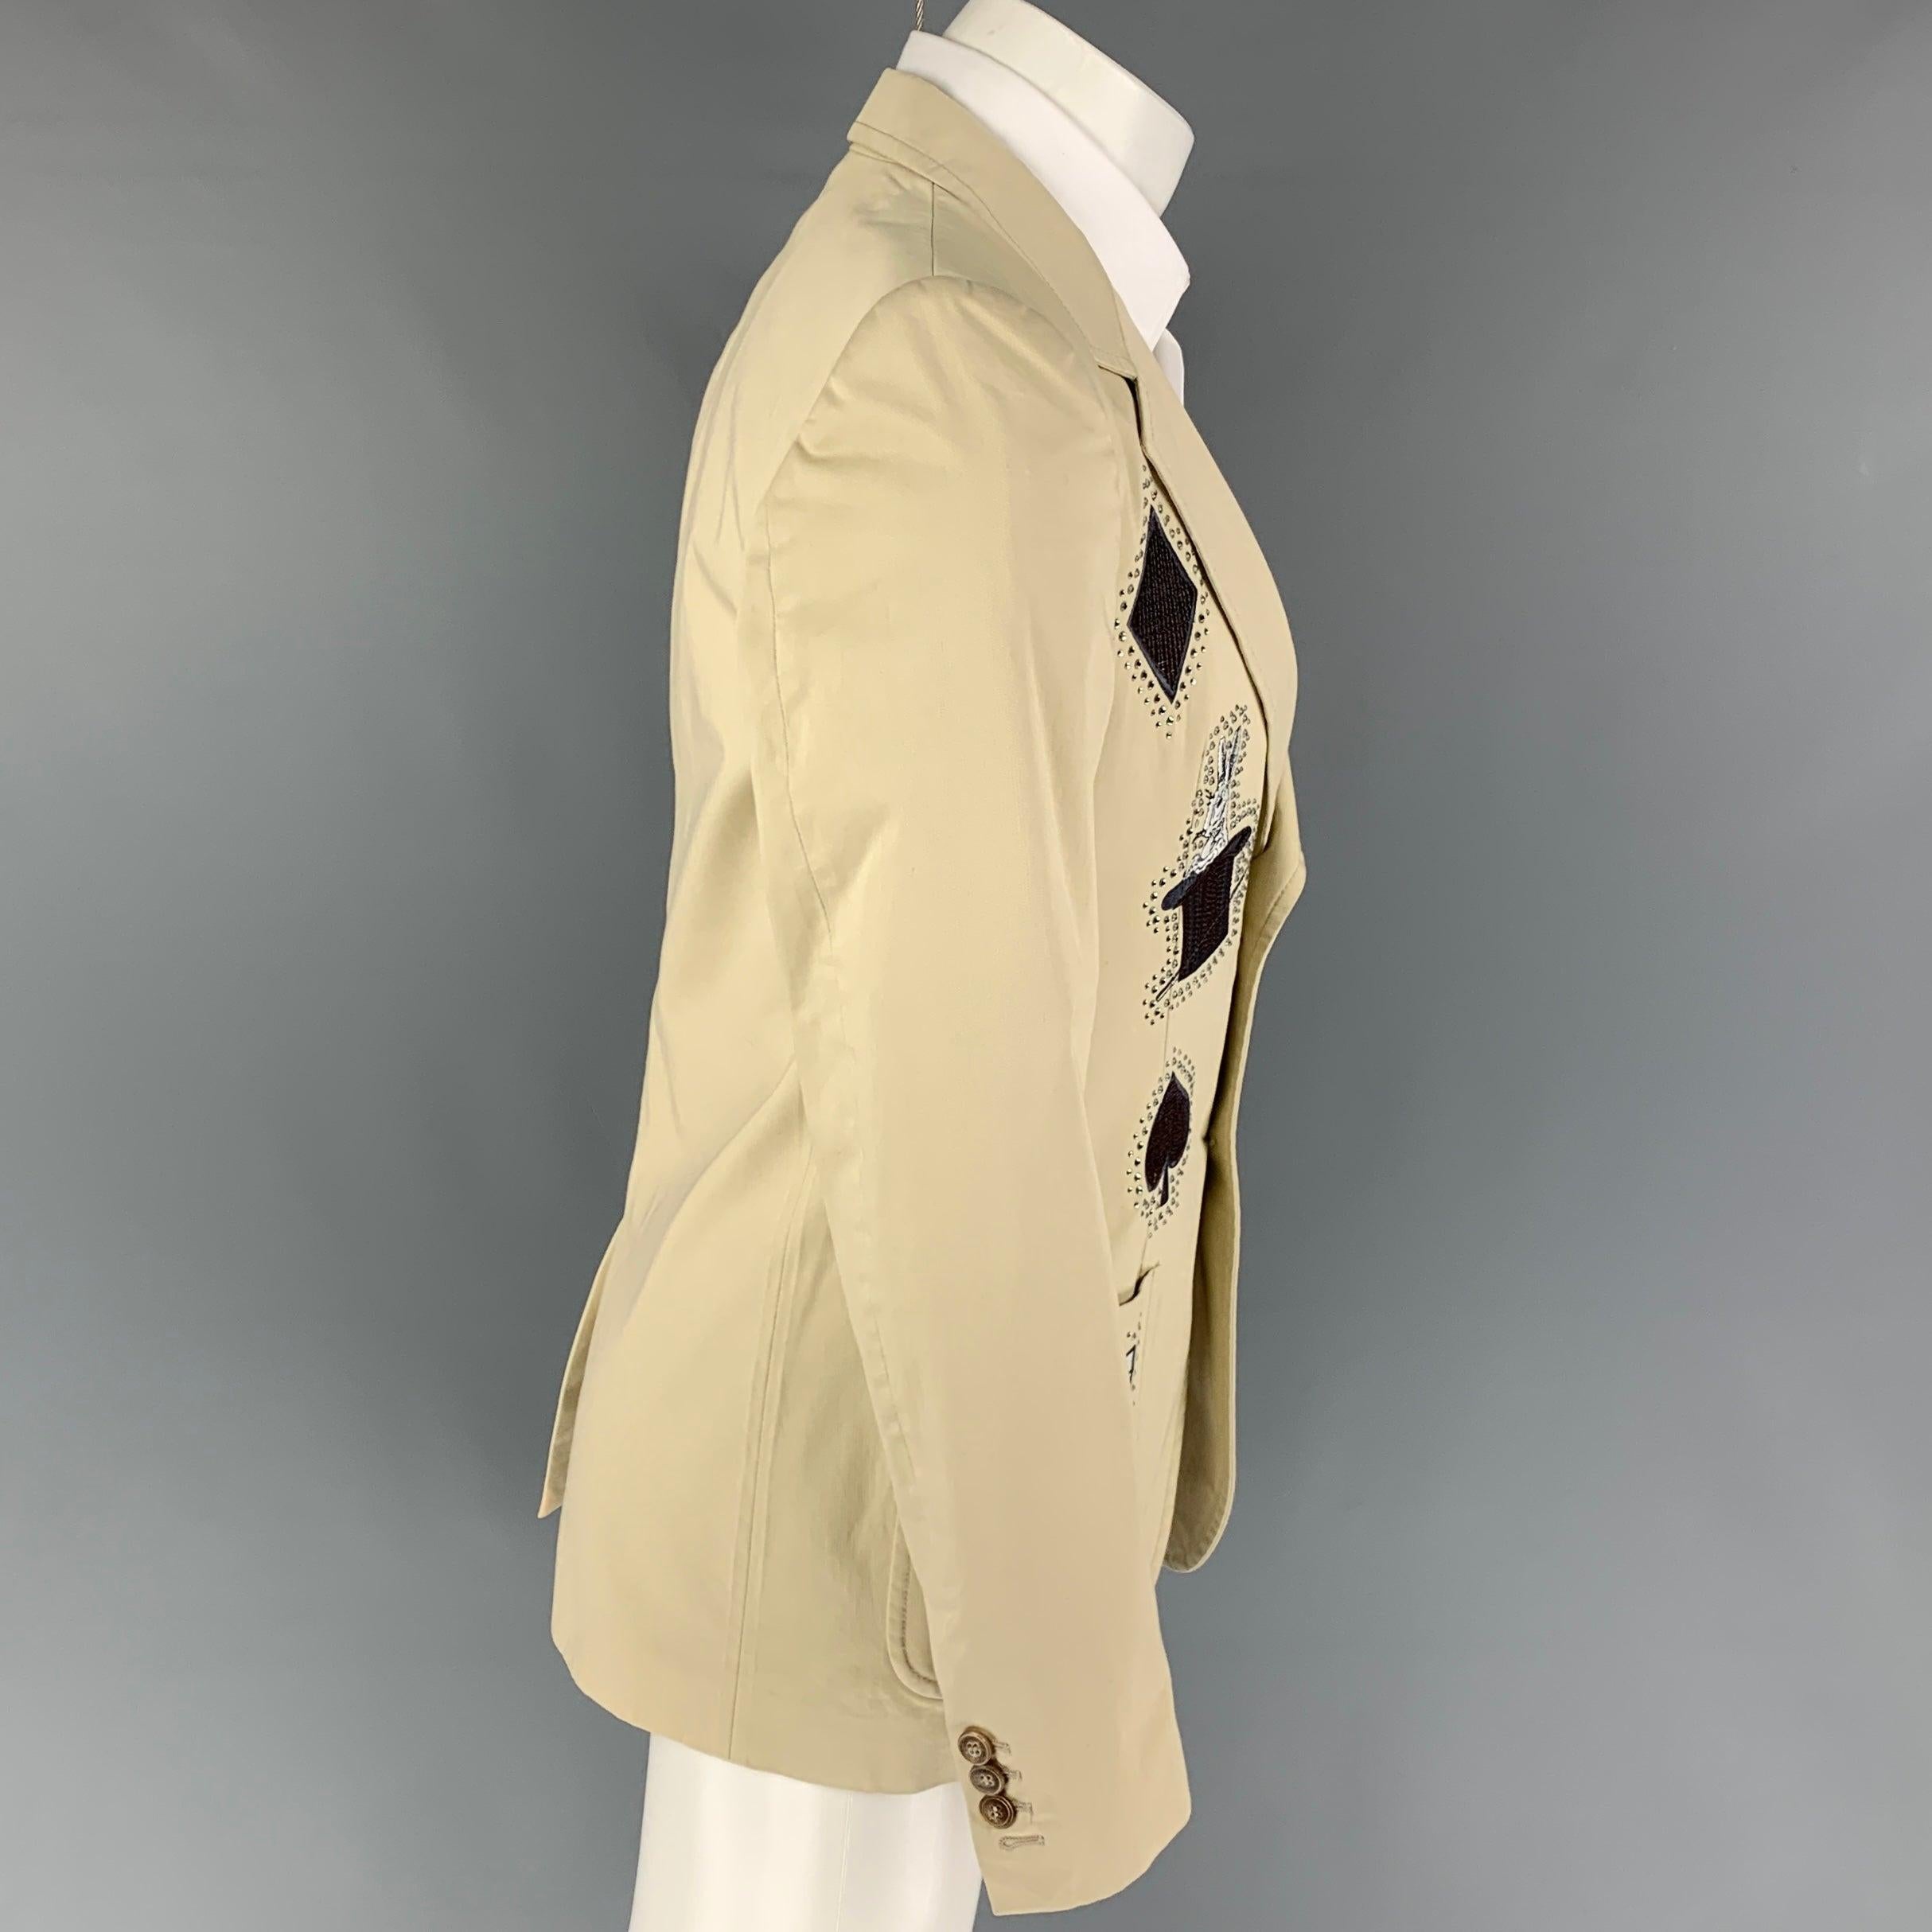 VIKTOR & ROLF sport coat comes in a beige cotton with a full liner featuring a notch lapel, embroidered designs, rhinestone details, patch pockets, single back vent, and a double button closure. Made in Italy.
New With Tags.
 

Marked:   46